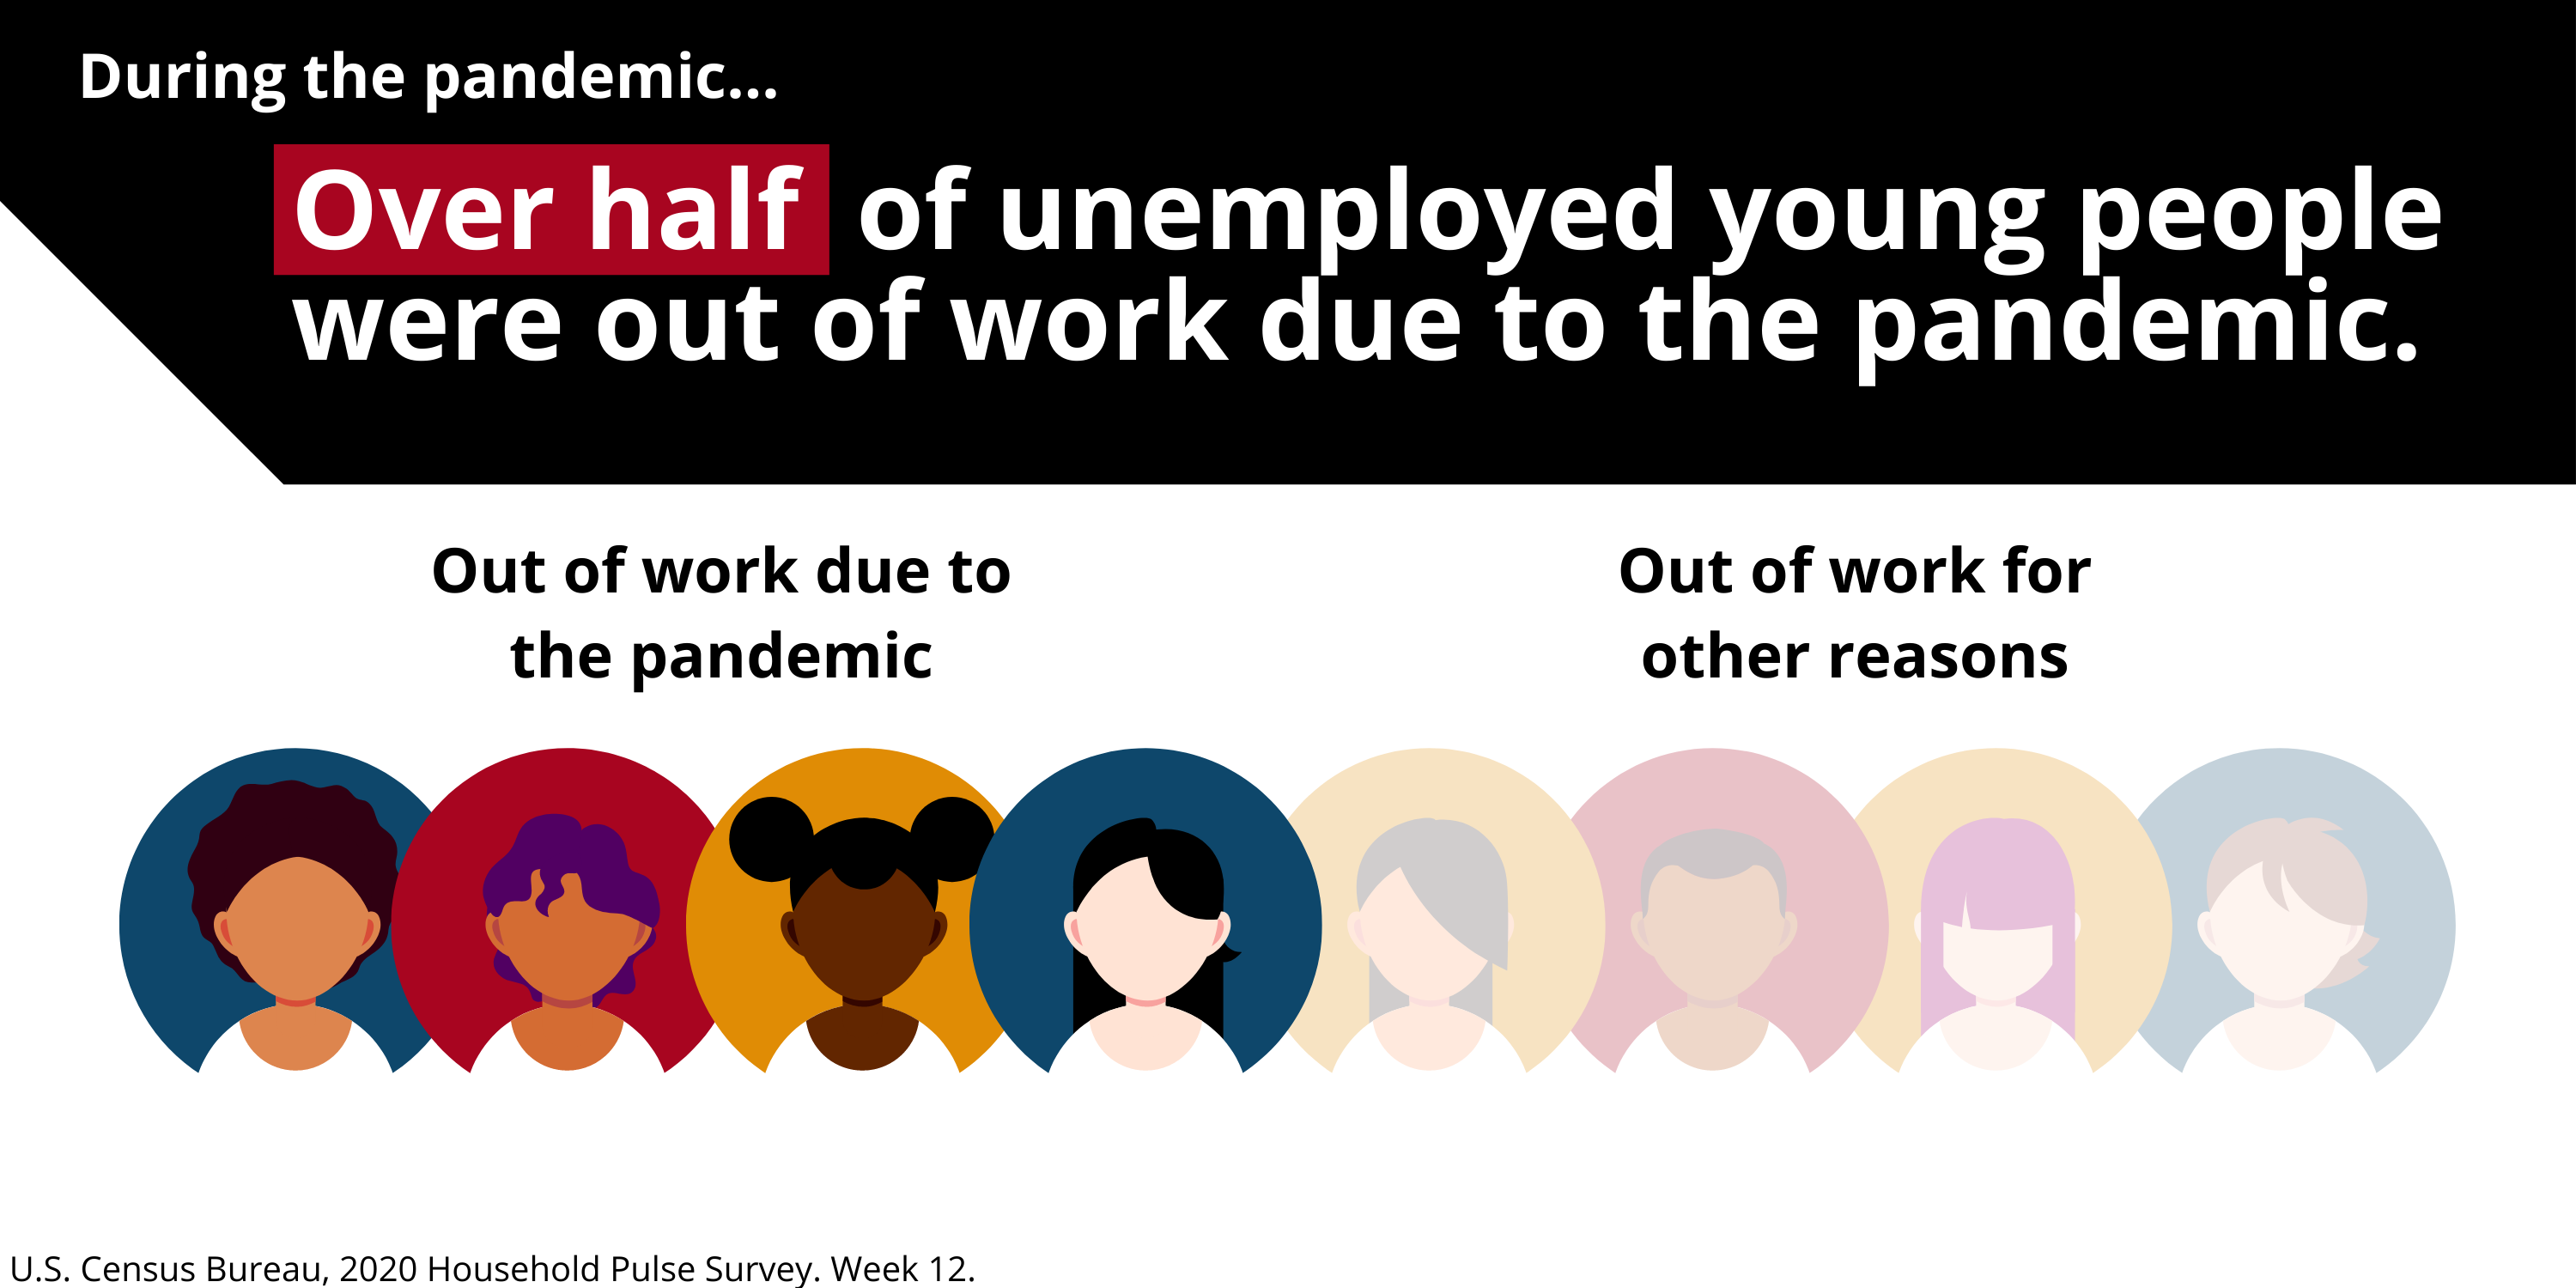 Over half  of unemployed young people were out of work due to the pandemic.